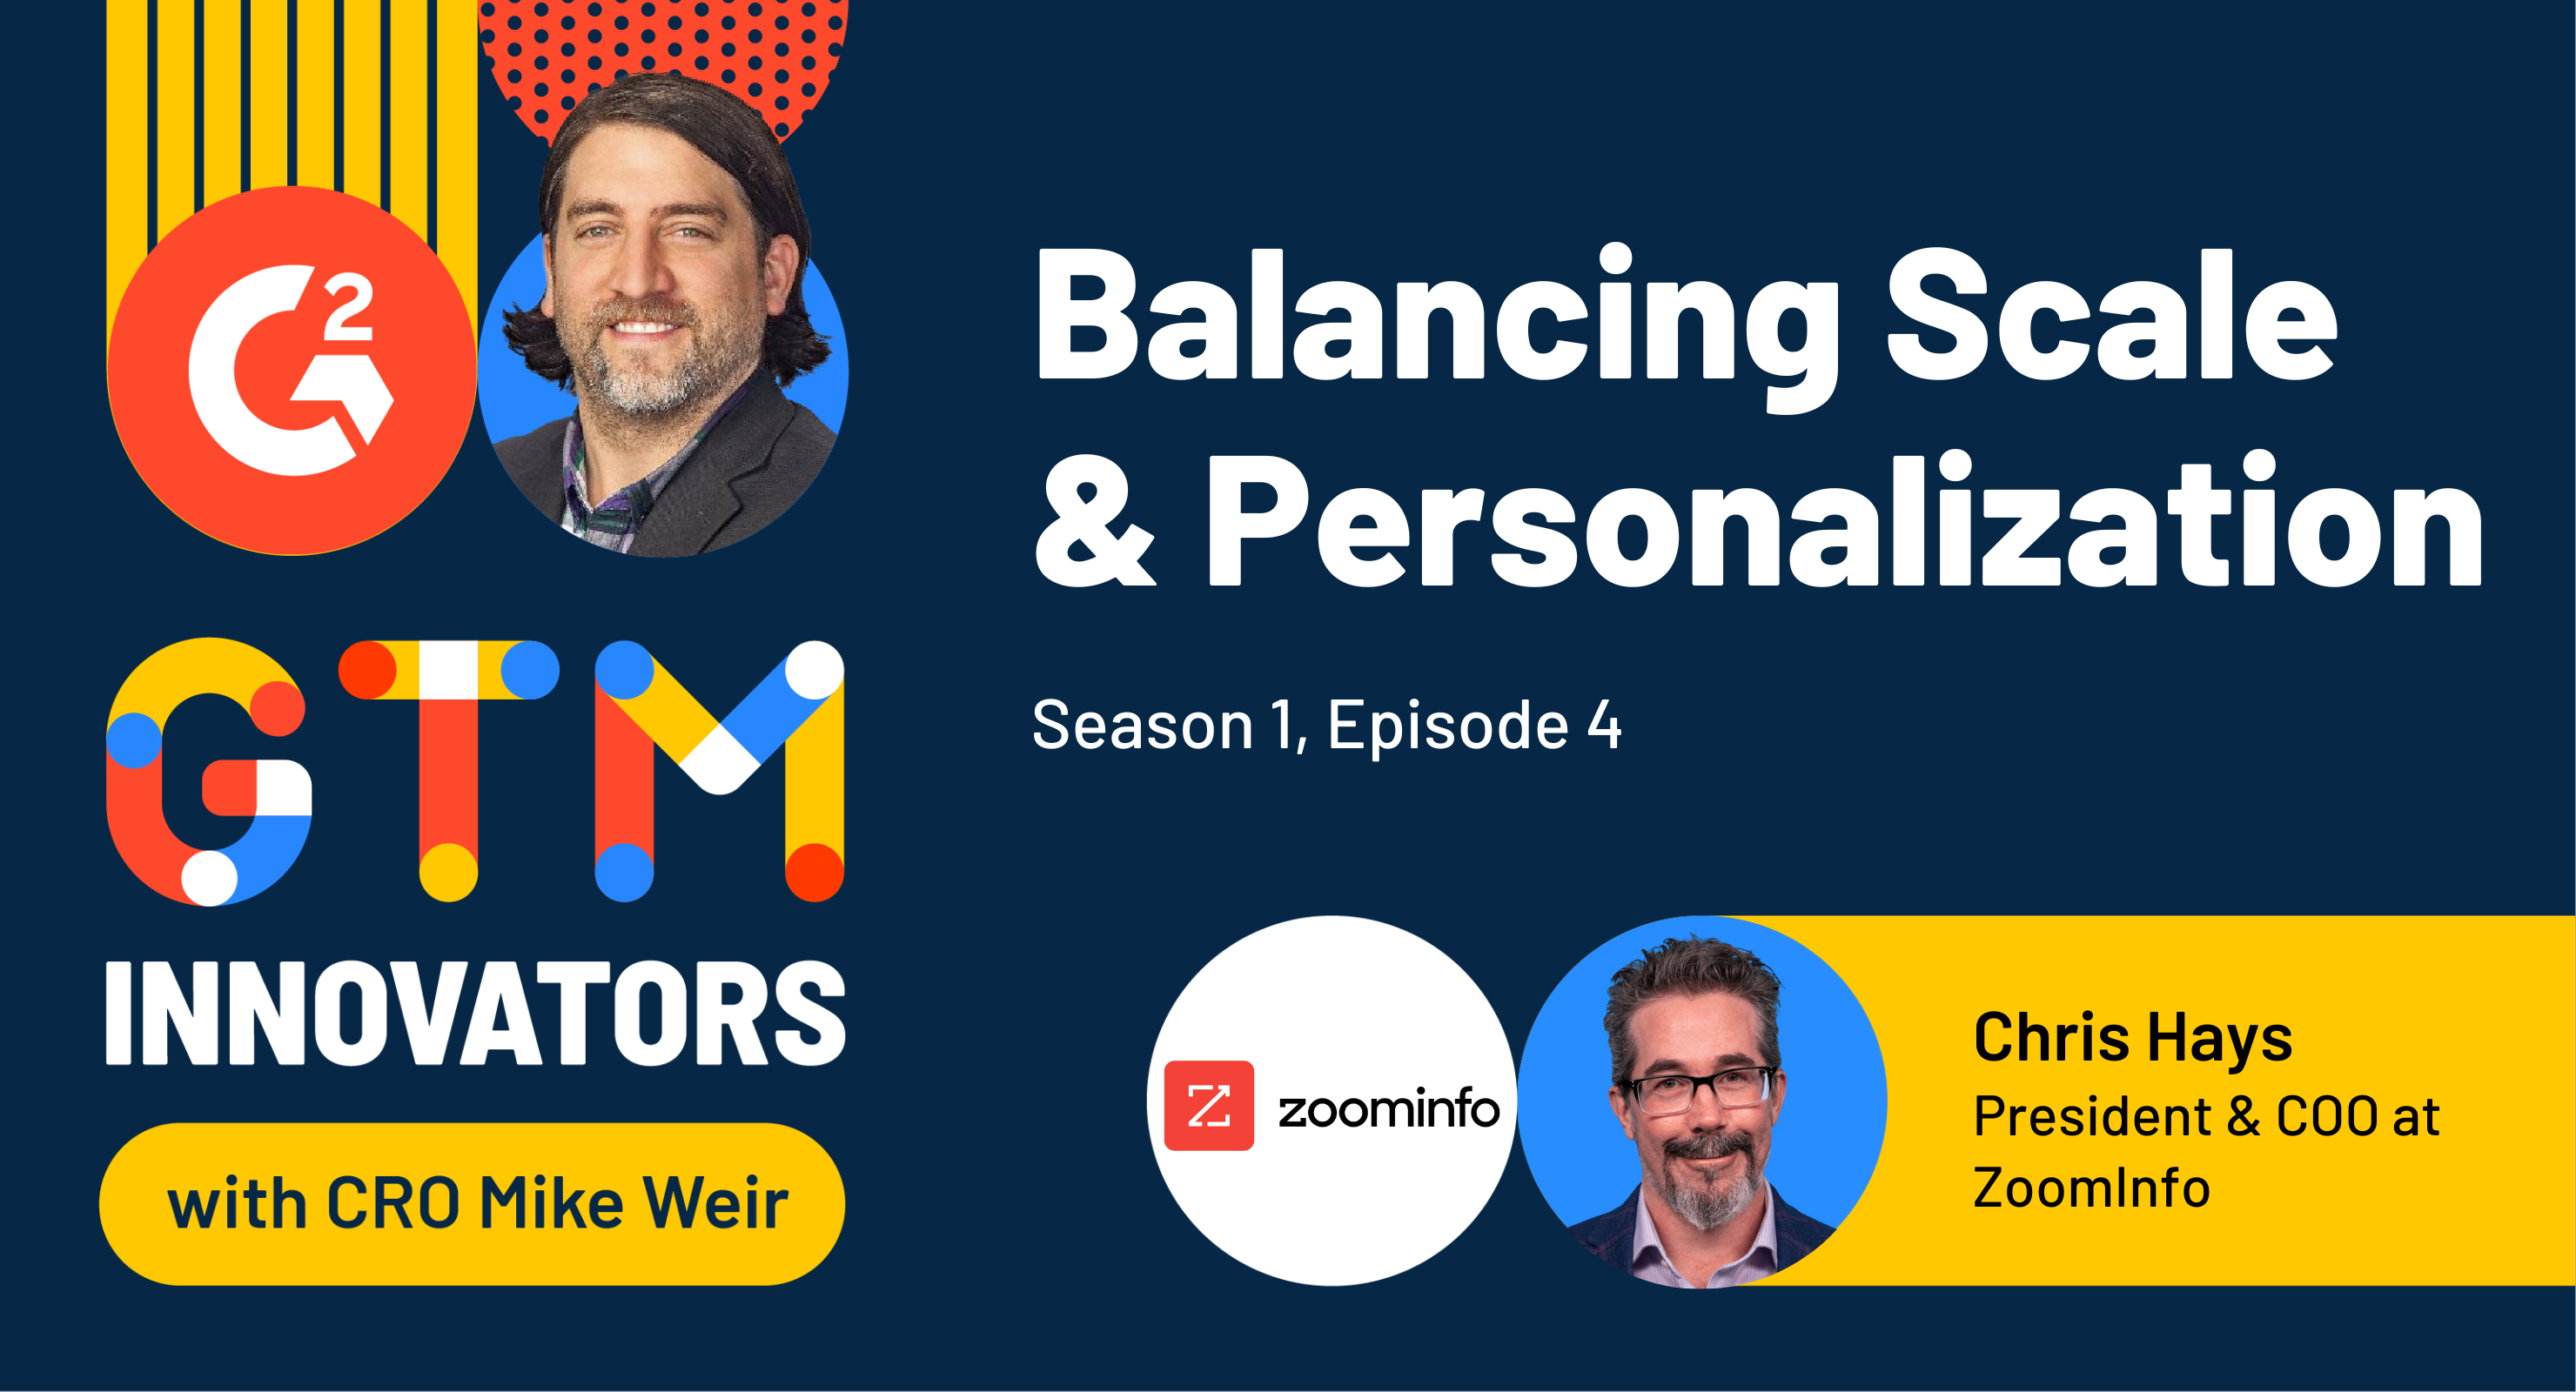 Chris Hays’ 4 Tips for Nailing Personalization at Scale